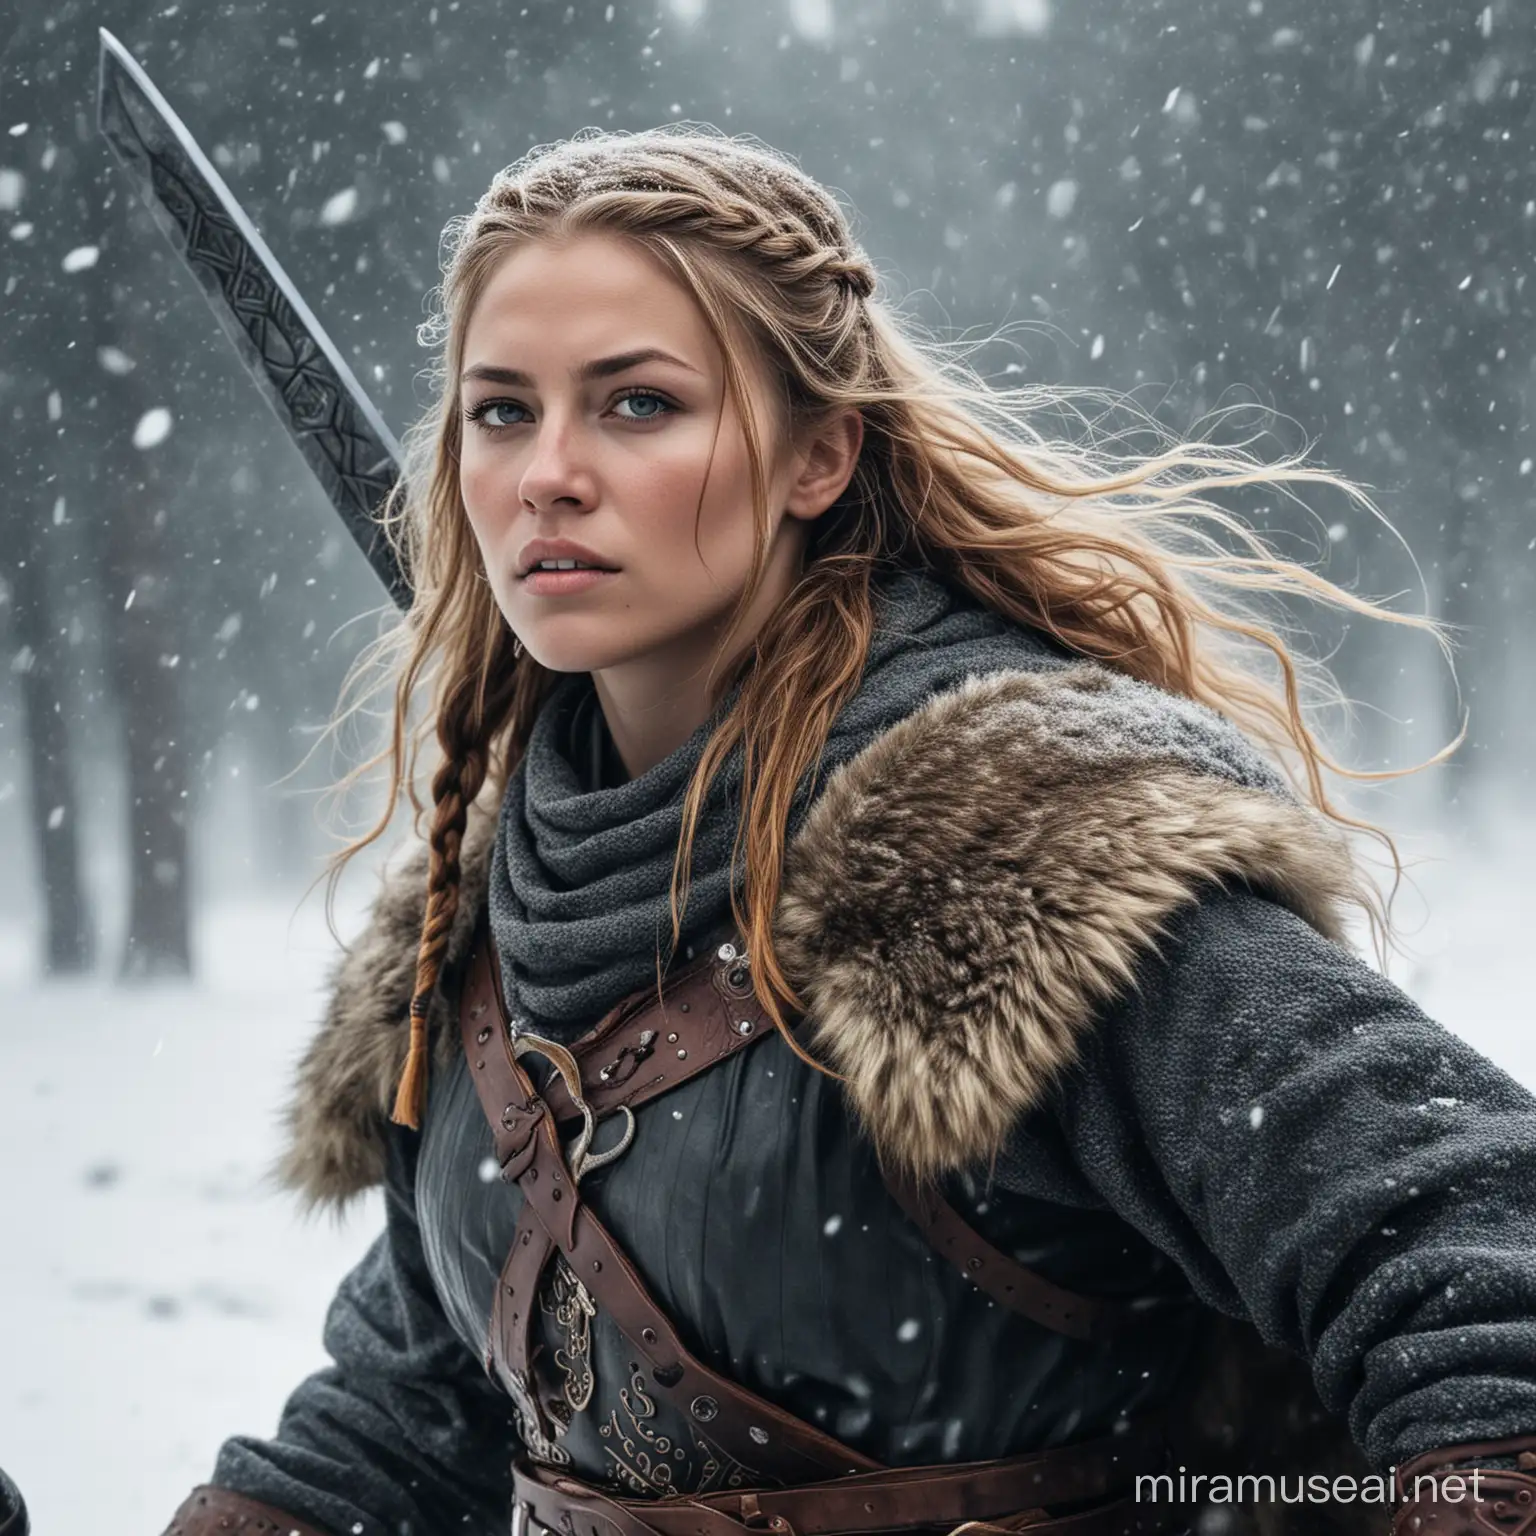 Imagine yourself as a Viking woman warrior  with a sword in the midst of a blizzard. Describe your appearance, including your weapon of choice and any unique characteristics